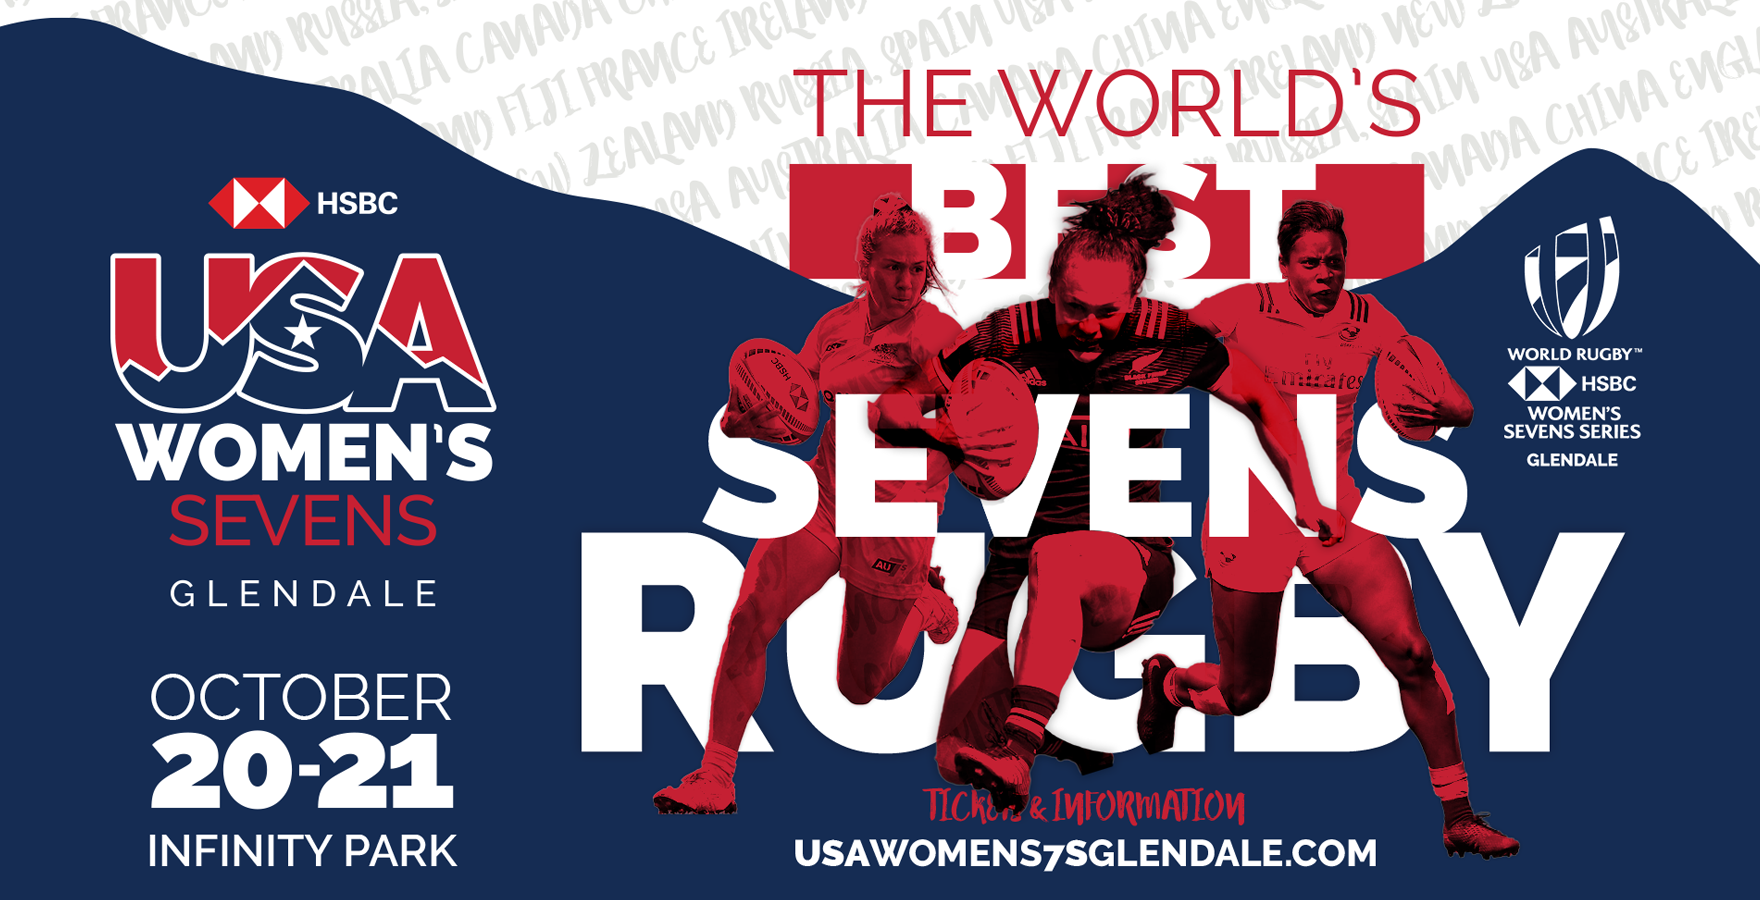 USAW7s, Rugby_Wrap_Up, Women’s Eagles Sevens HSBC USA Women’s Sevens 2018 Preview